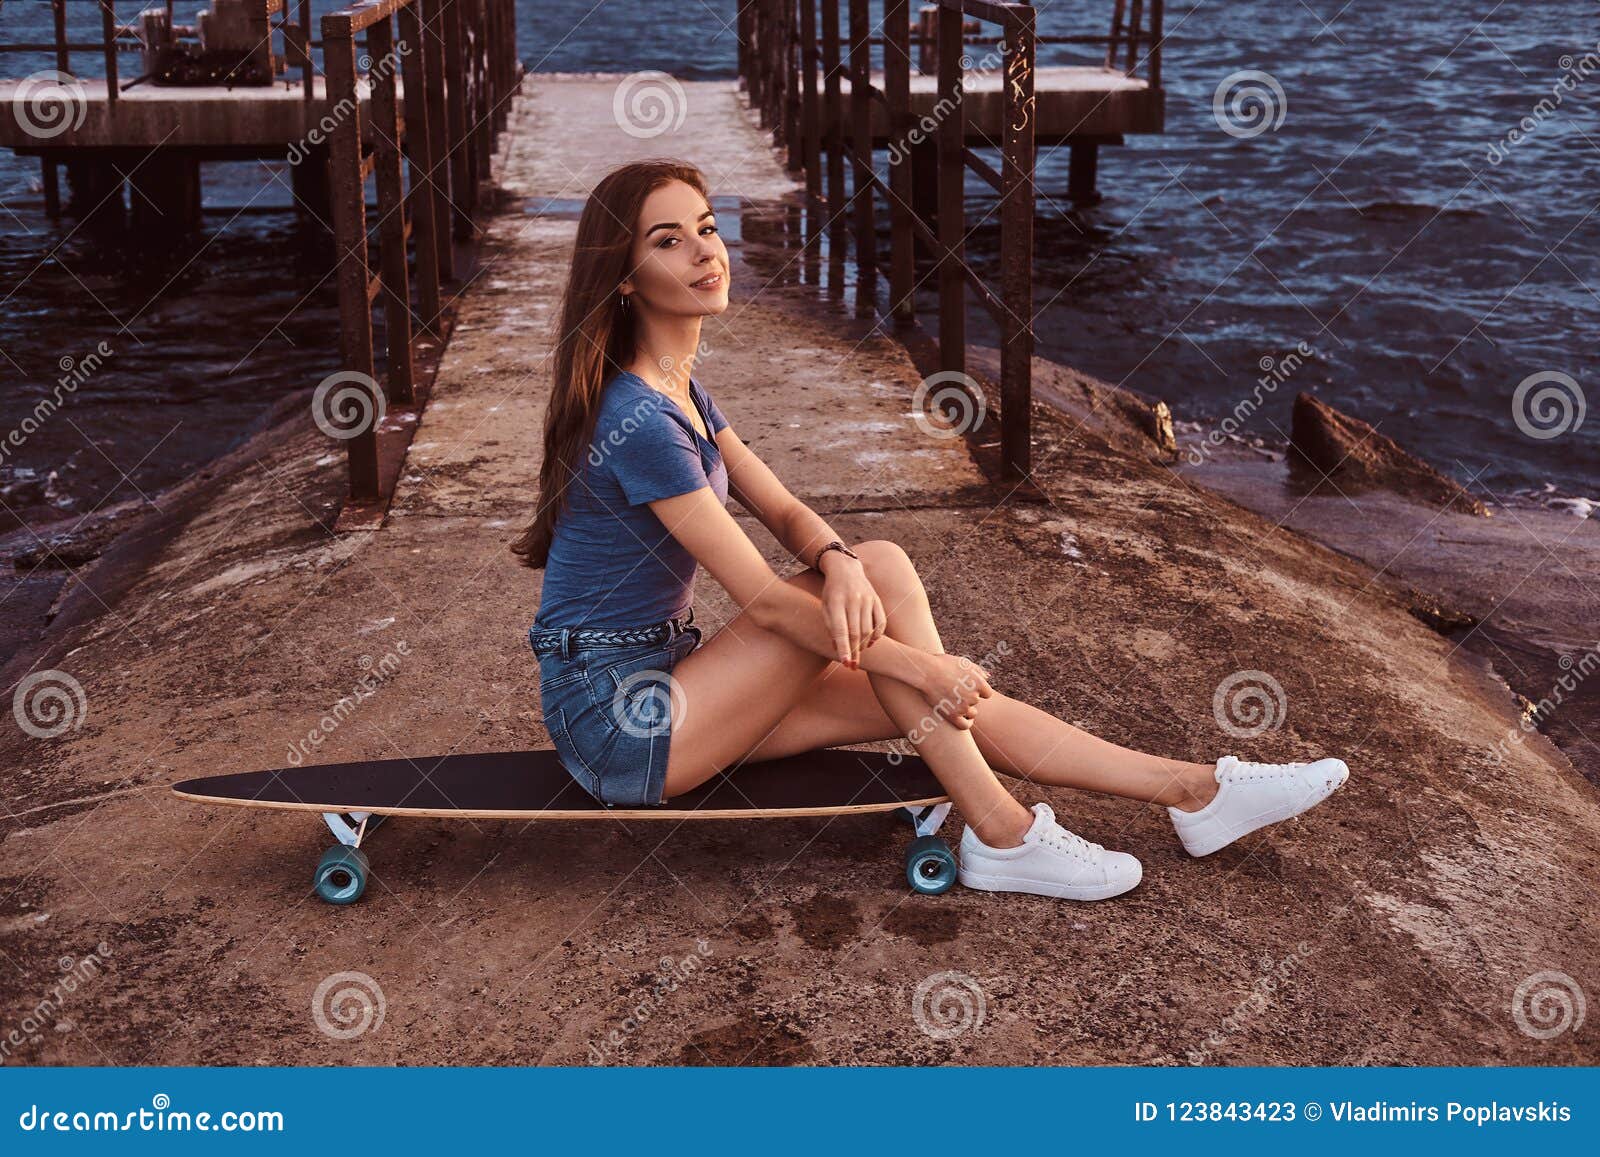 Portrait Of A Girl Sitting On A Skateboard On The Old Pier Is Enjoying Amazing Dark Cloudy 